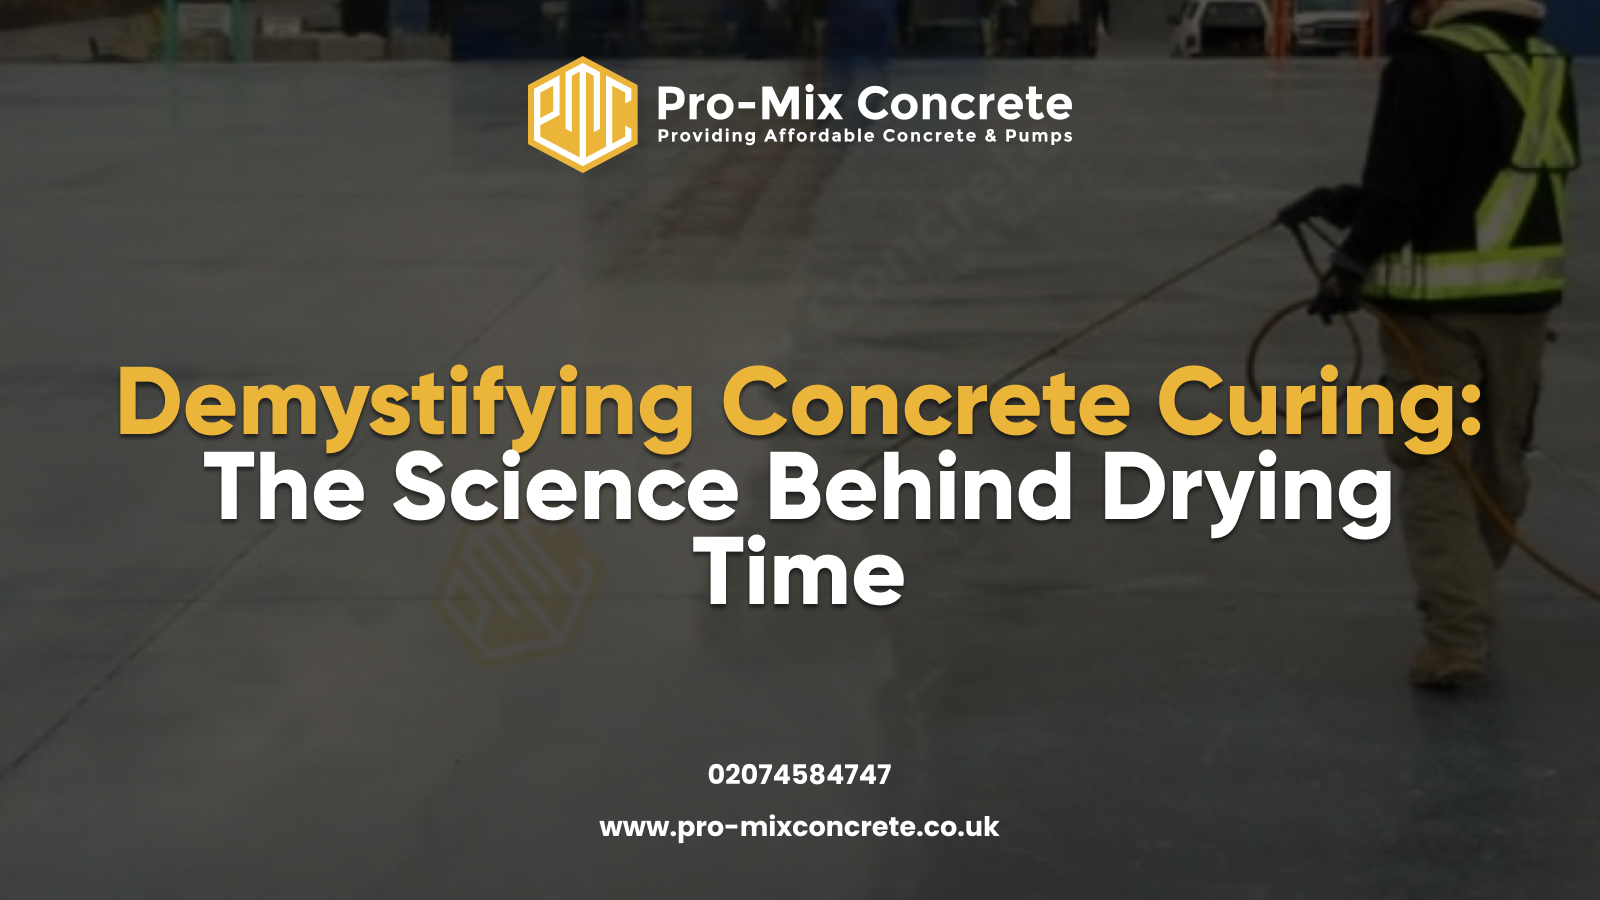 Demystifying Concrete Curing: The Science Behind Drying Time